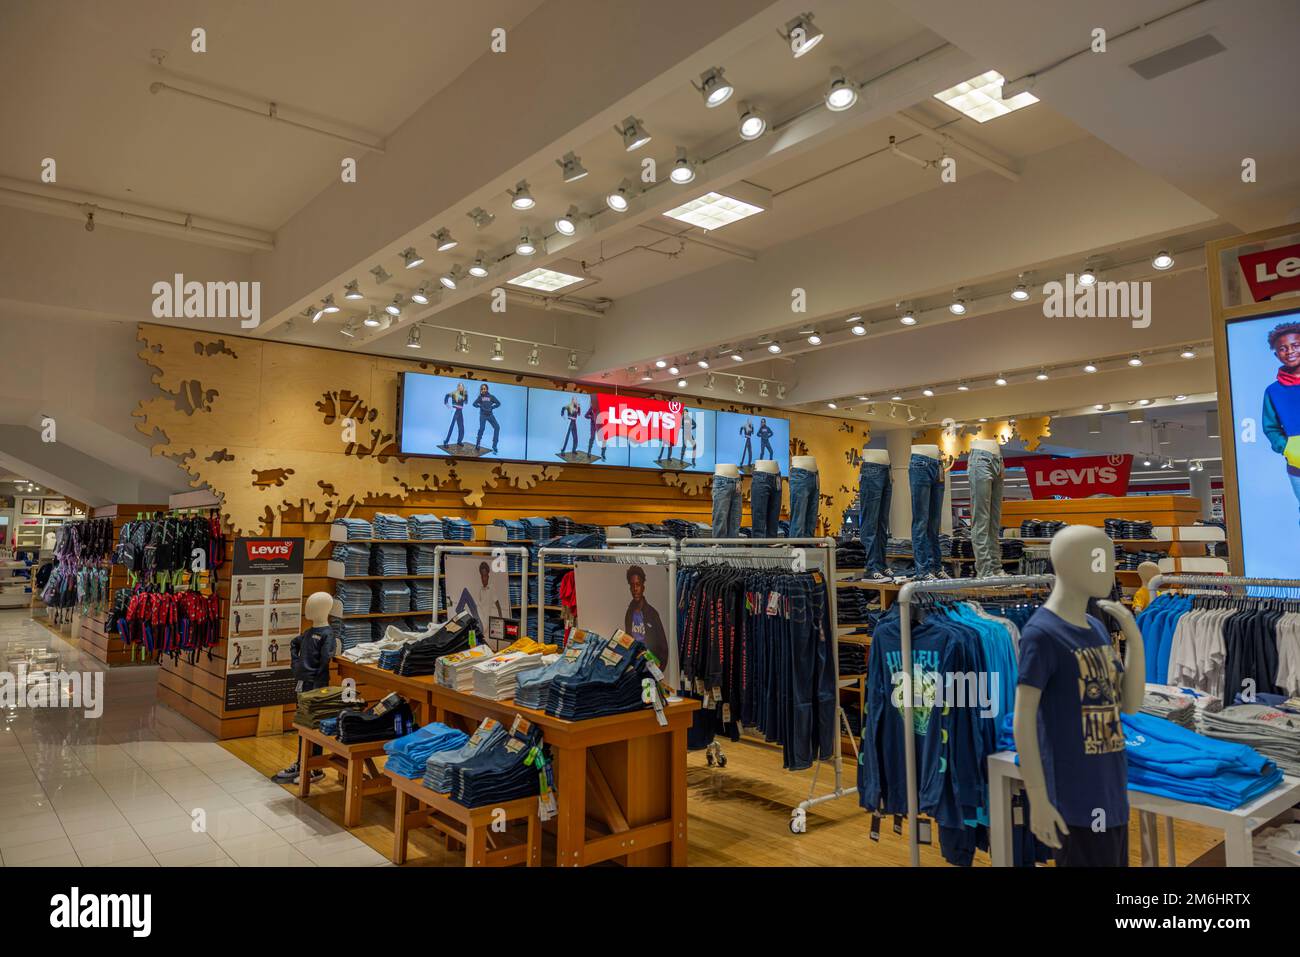 Interior view of Levi's clothing department of Macy's store, New York ...